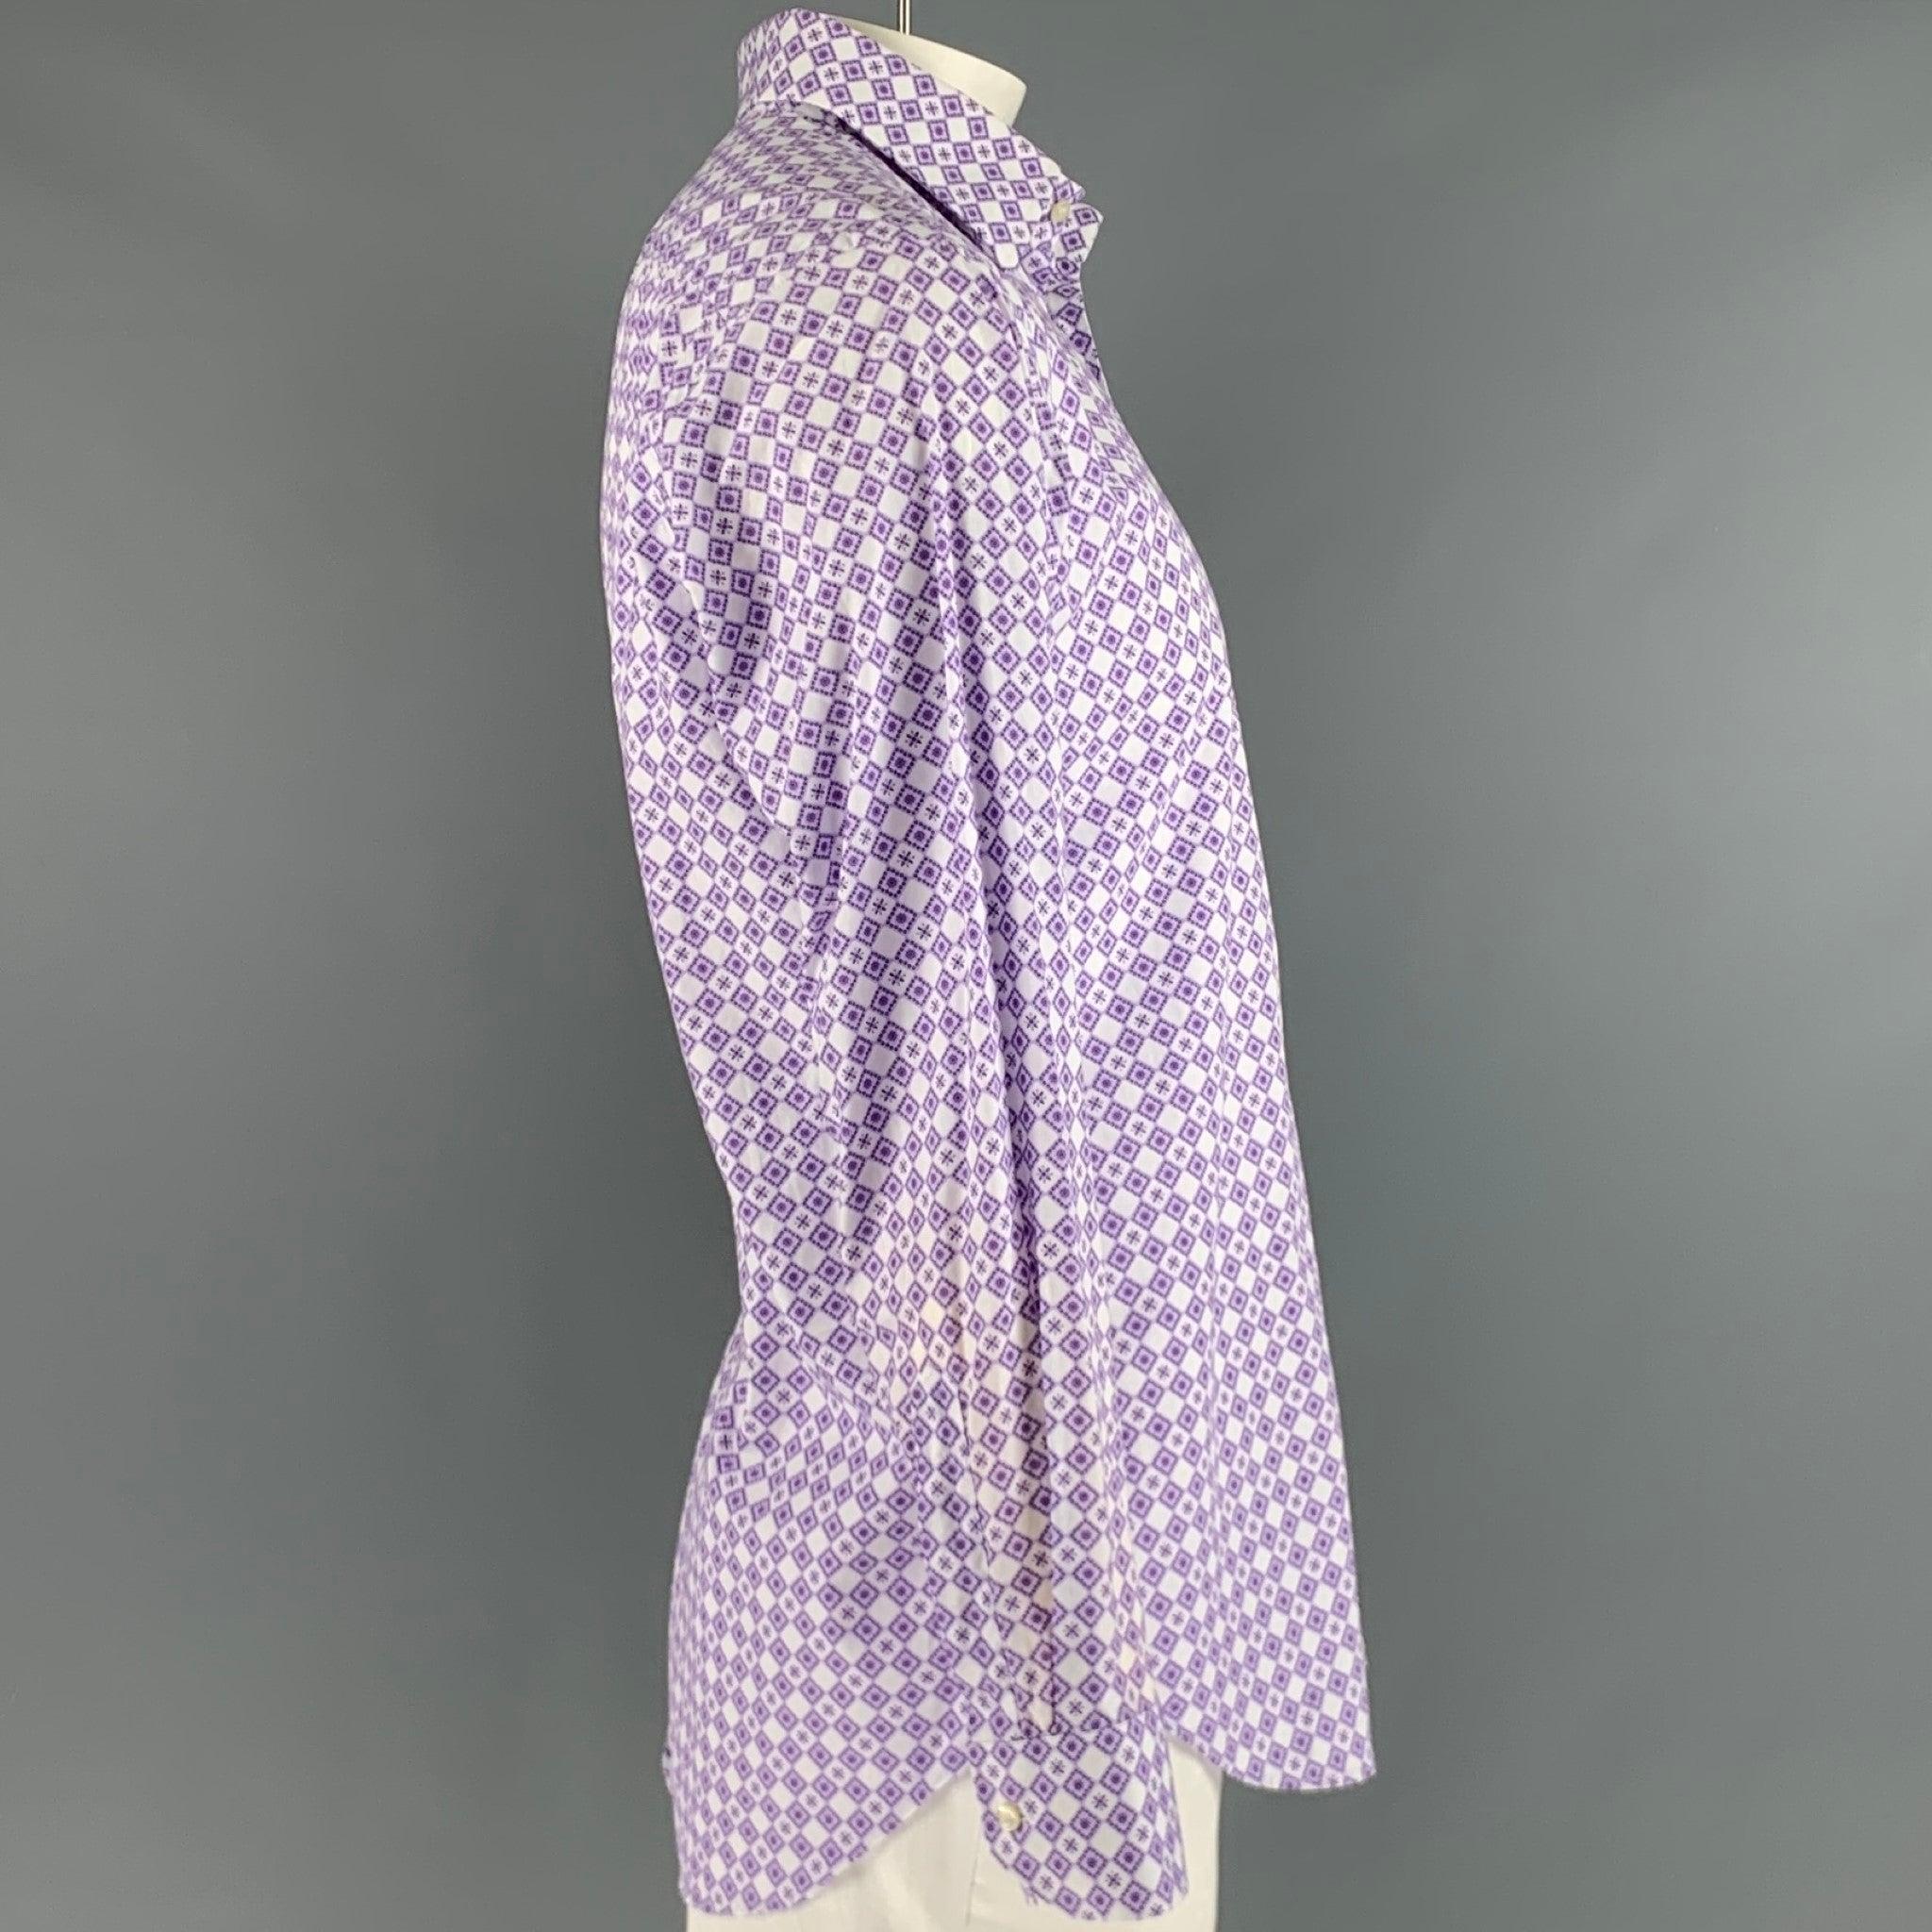 ETRO long sleeve shirt
in a purple and white cotton weave featuring rhombus print, spread collar, and button closure. Made in Italy.Excellent Pre-Owned Condition. 

Marked:   42 

Measurements: 
 
Shoulder: 17 inches Chest: 46 inches Sleeve: 26